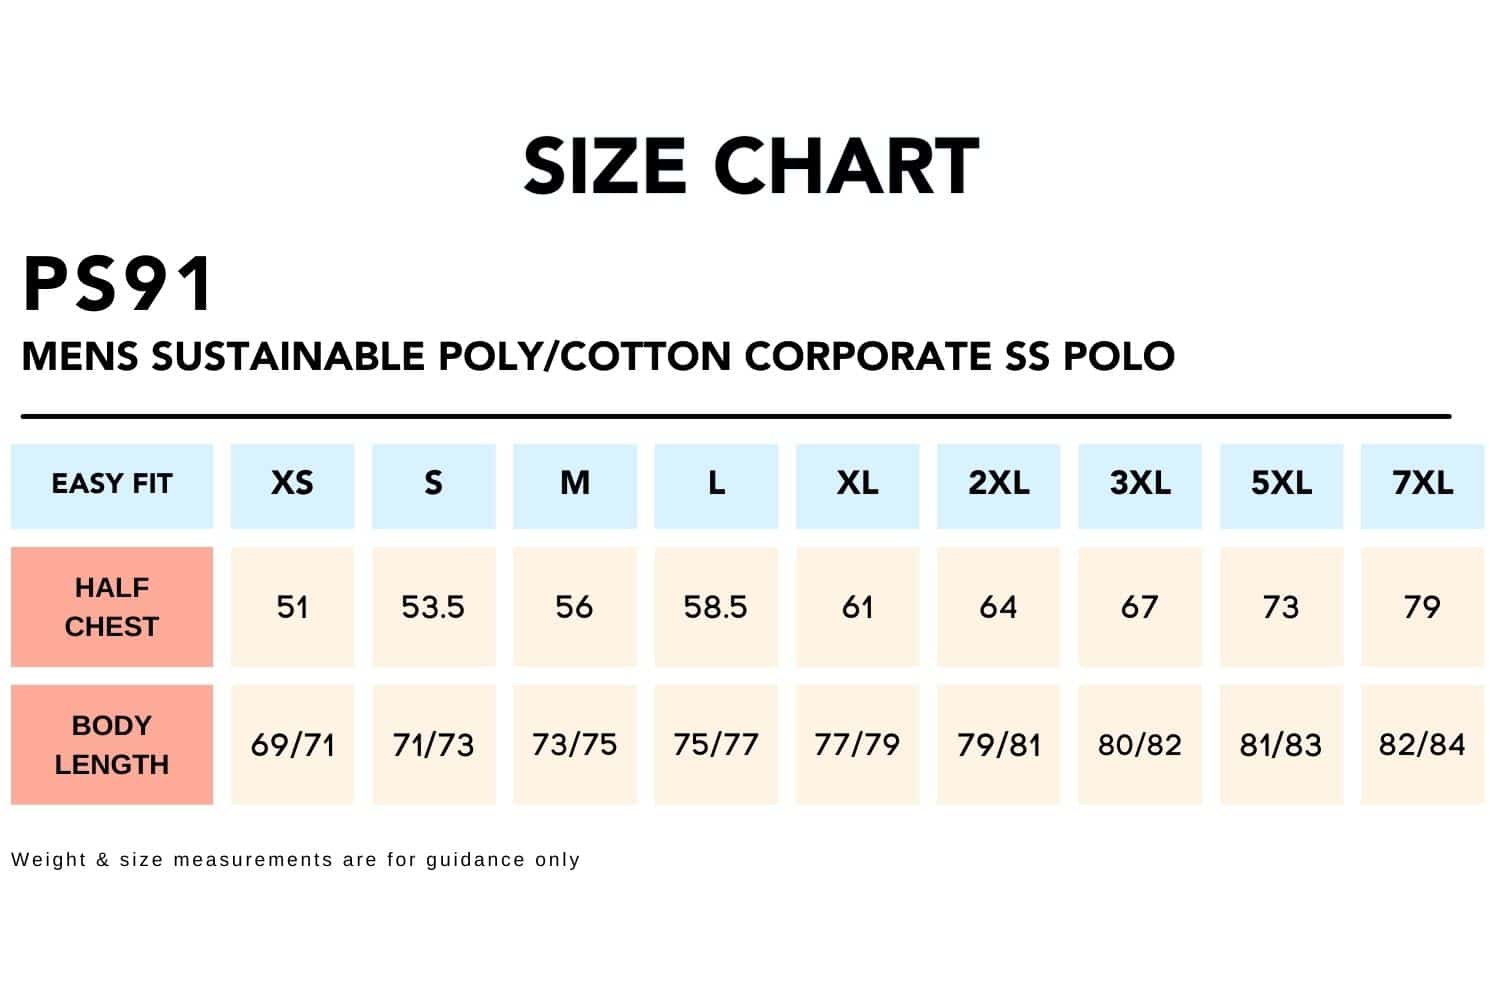 Size-Chart_PS91-MENS-SUSTAINABLE-POLYCOTTON-CORPORATE-SS-POLO